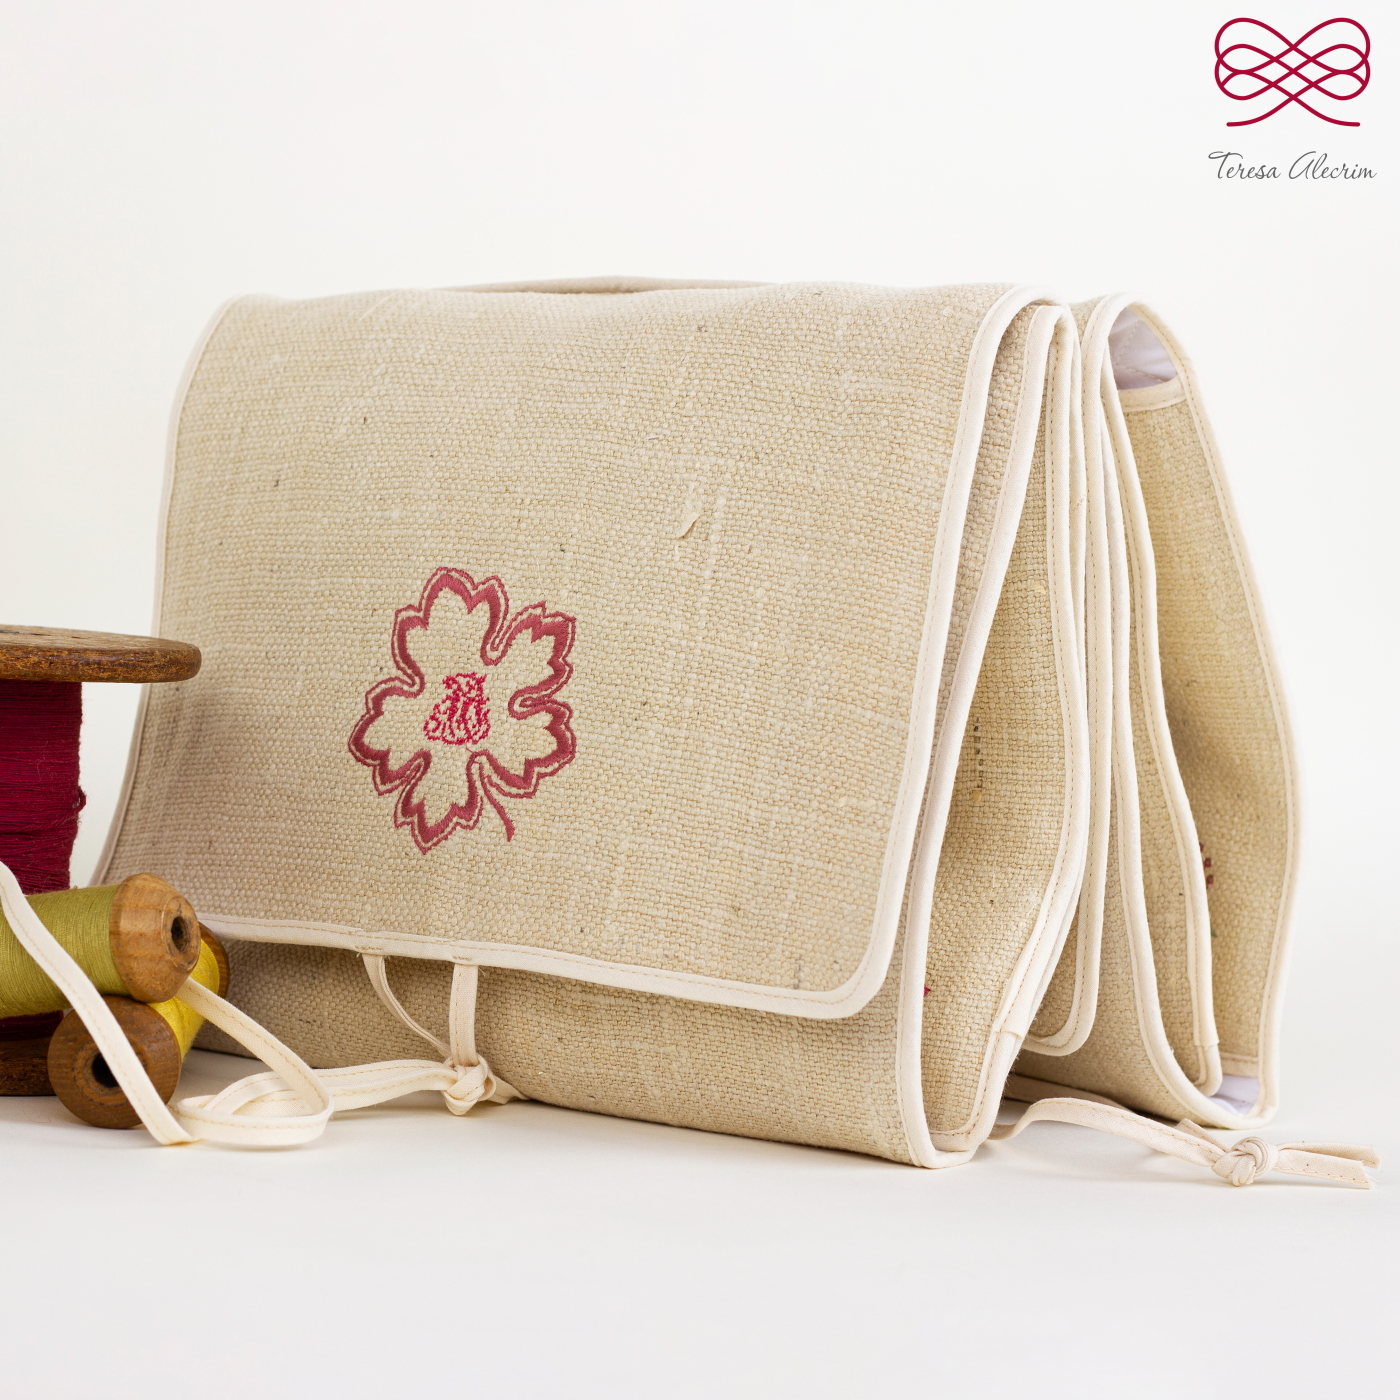 JUTE BAG WITH EMBROIDERY